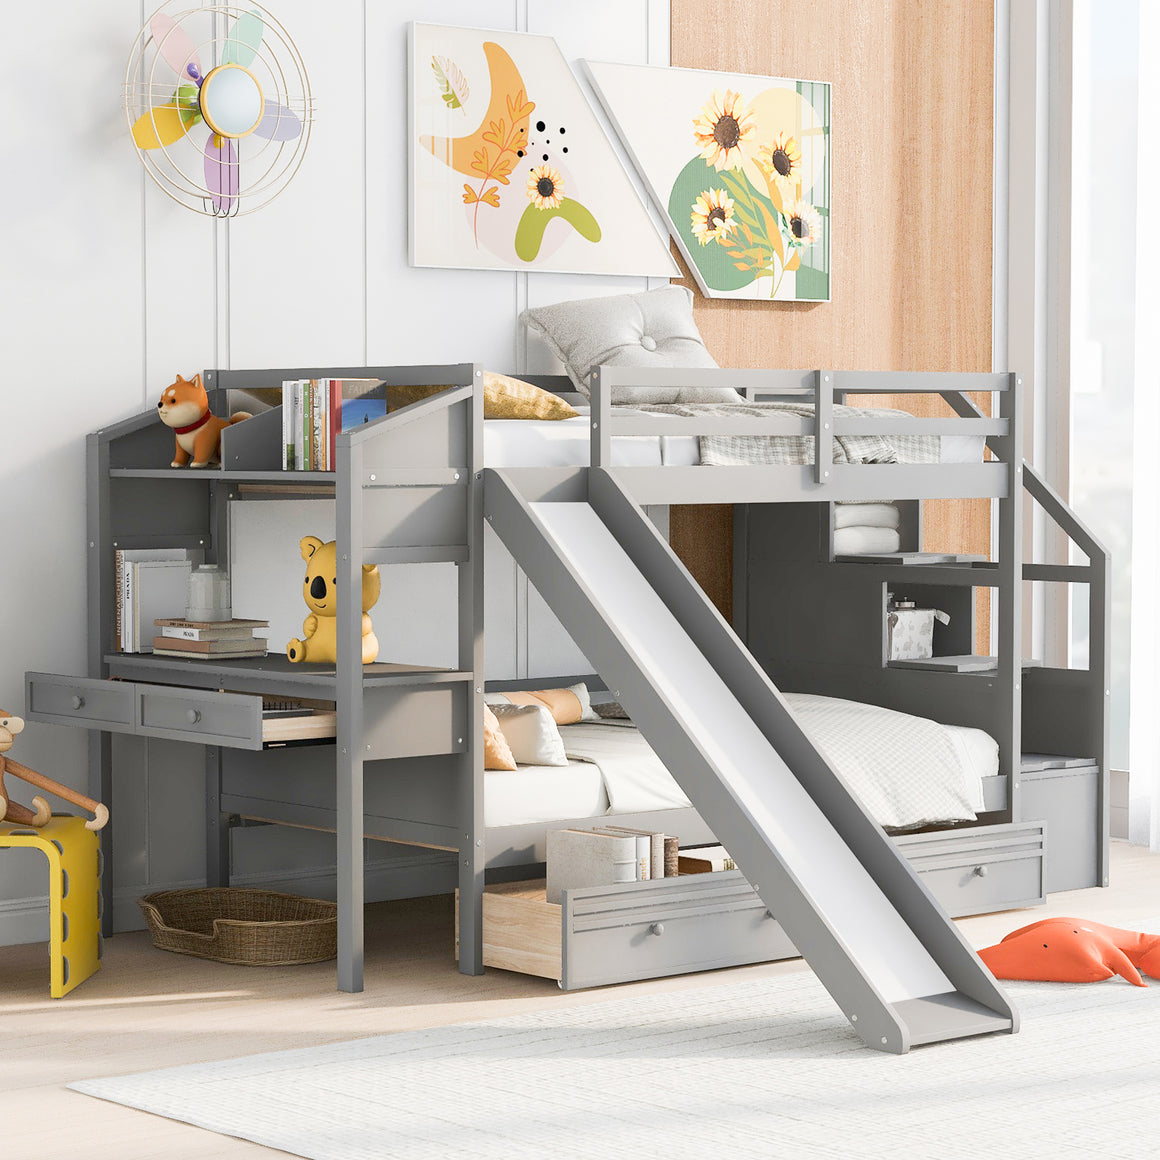 uhomepro Twin over Twin Bunk Bed with Storage Staircase Slide Drawers Desk Shelves, Bunkbed Frame for Kids Teens, No Box Spring Needed, Gray